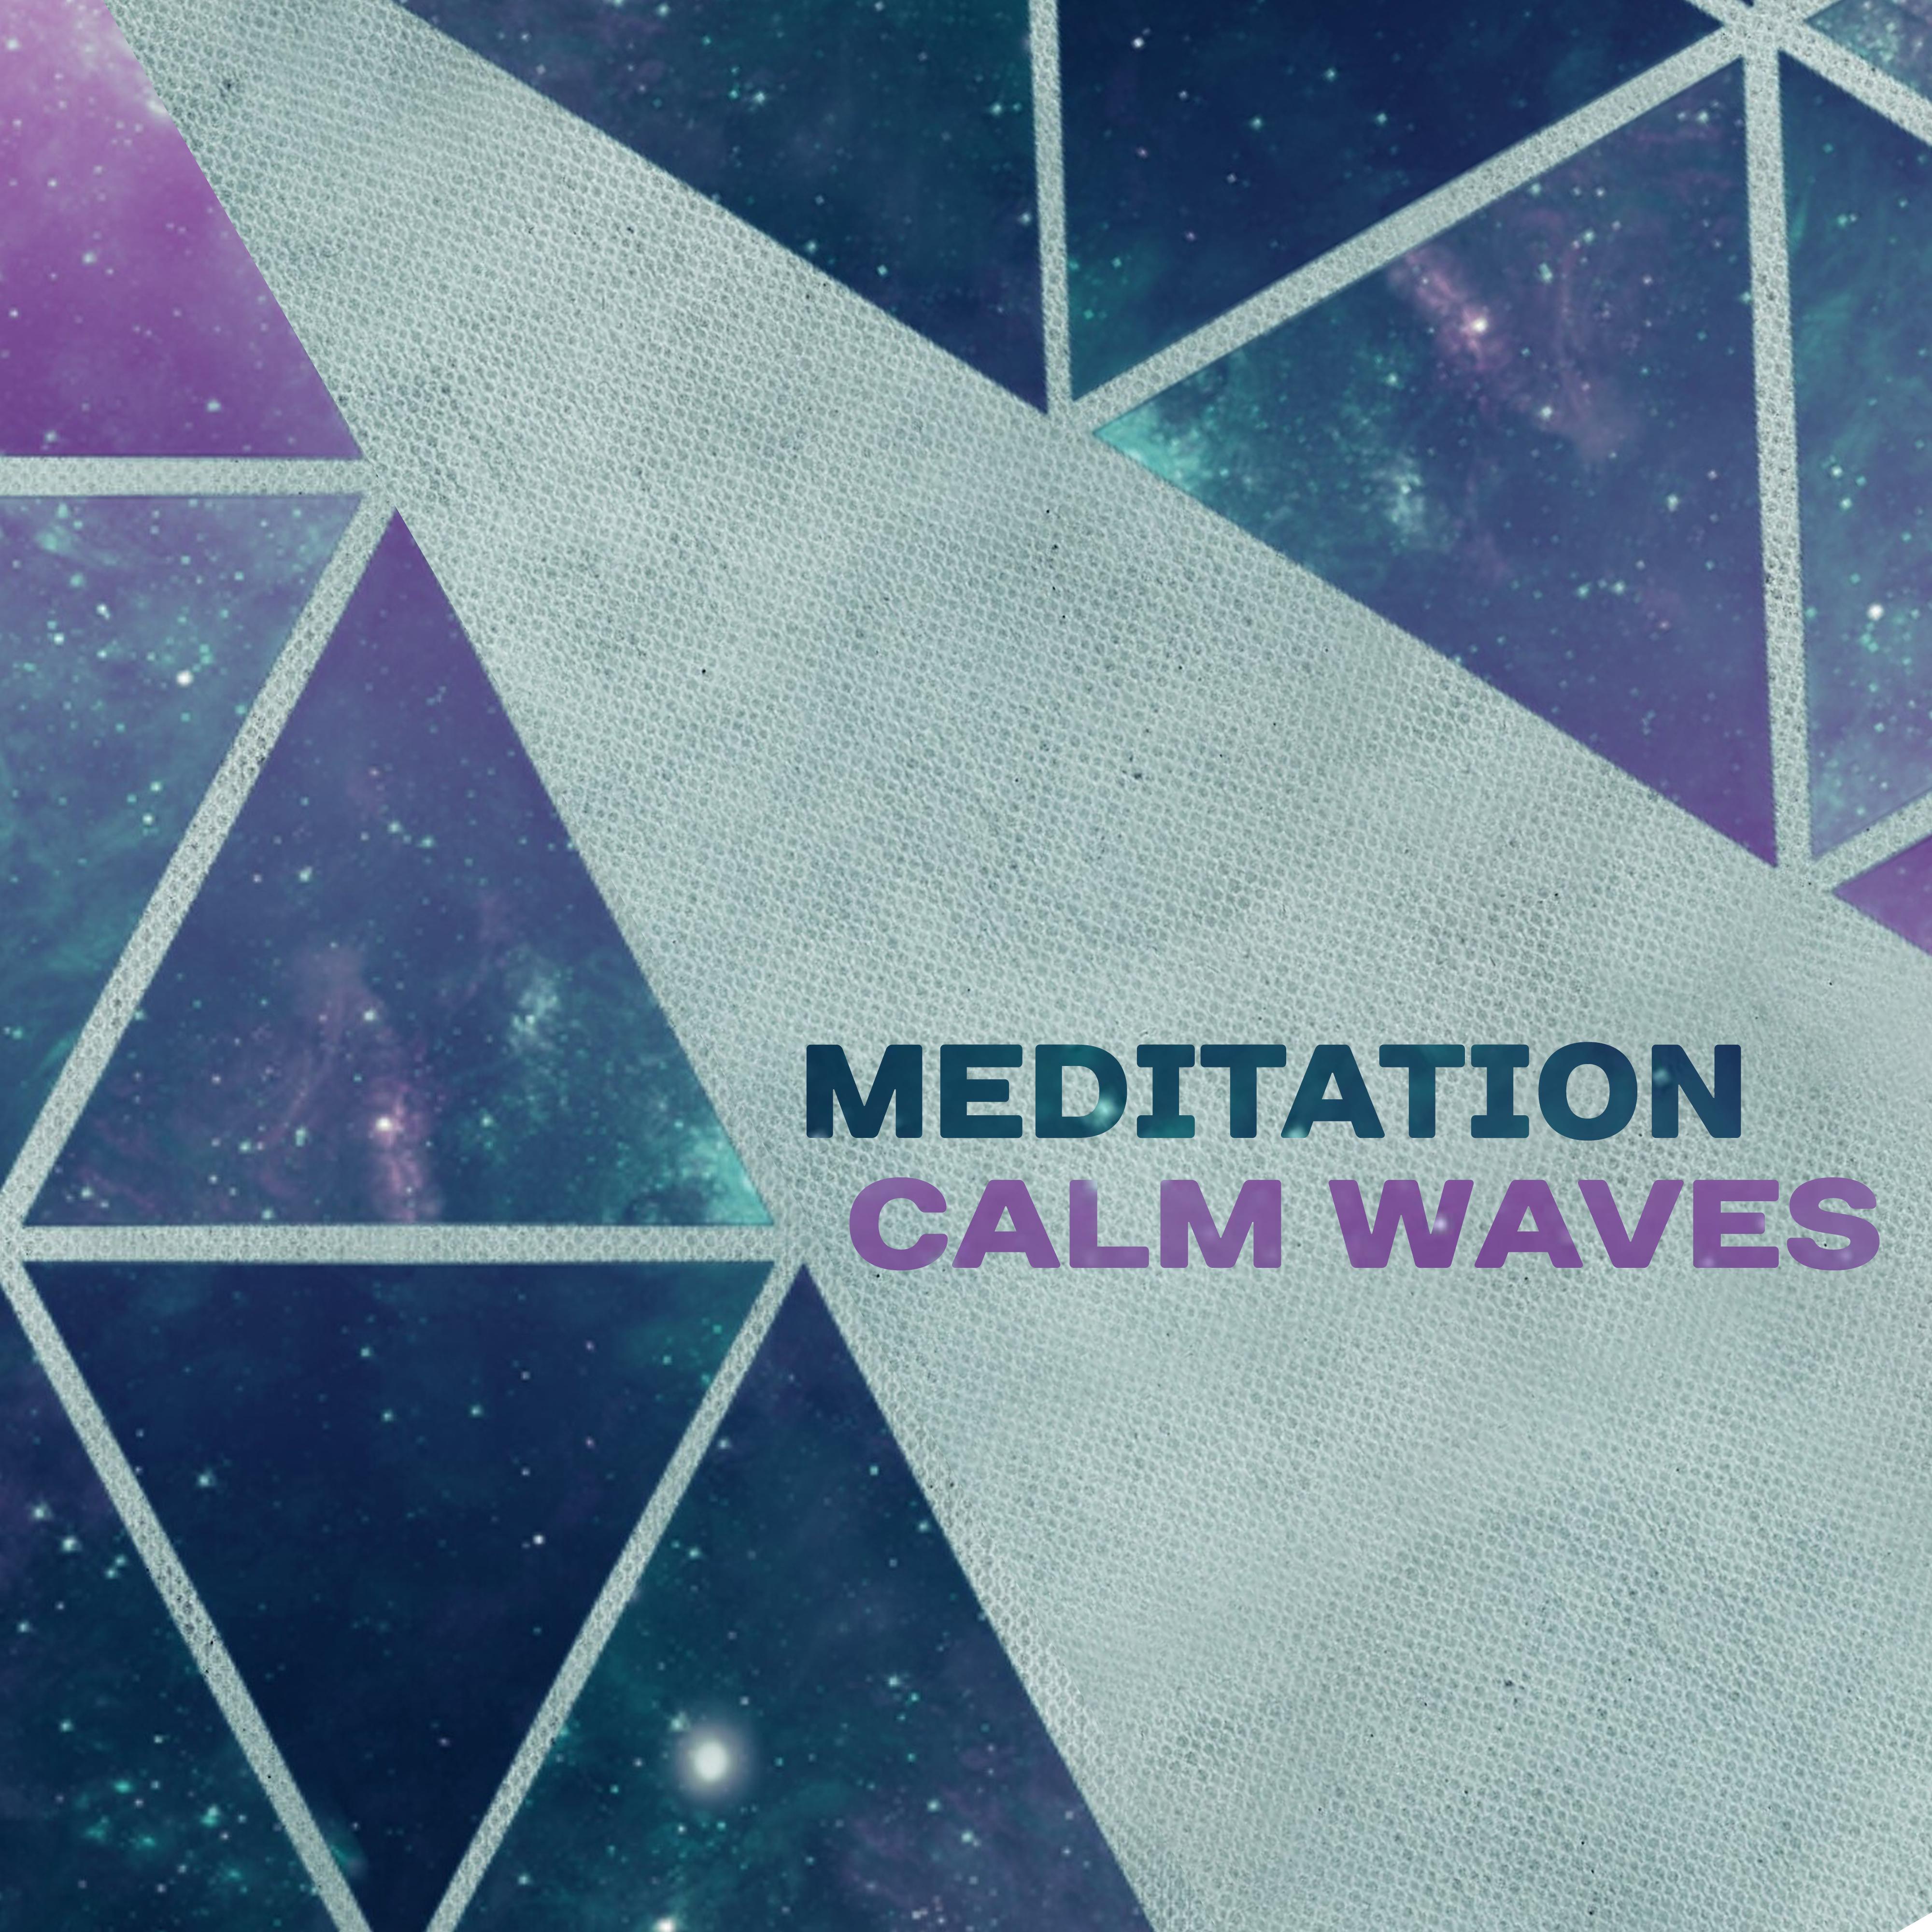 Meditation Calm Waves  Soft New Age Music, Relaxing Sounds, Chilled Waves, Mind Control